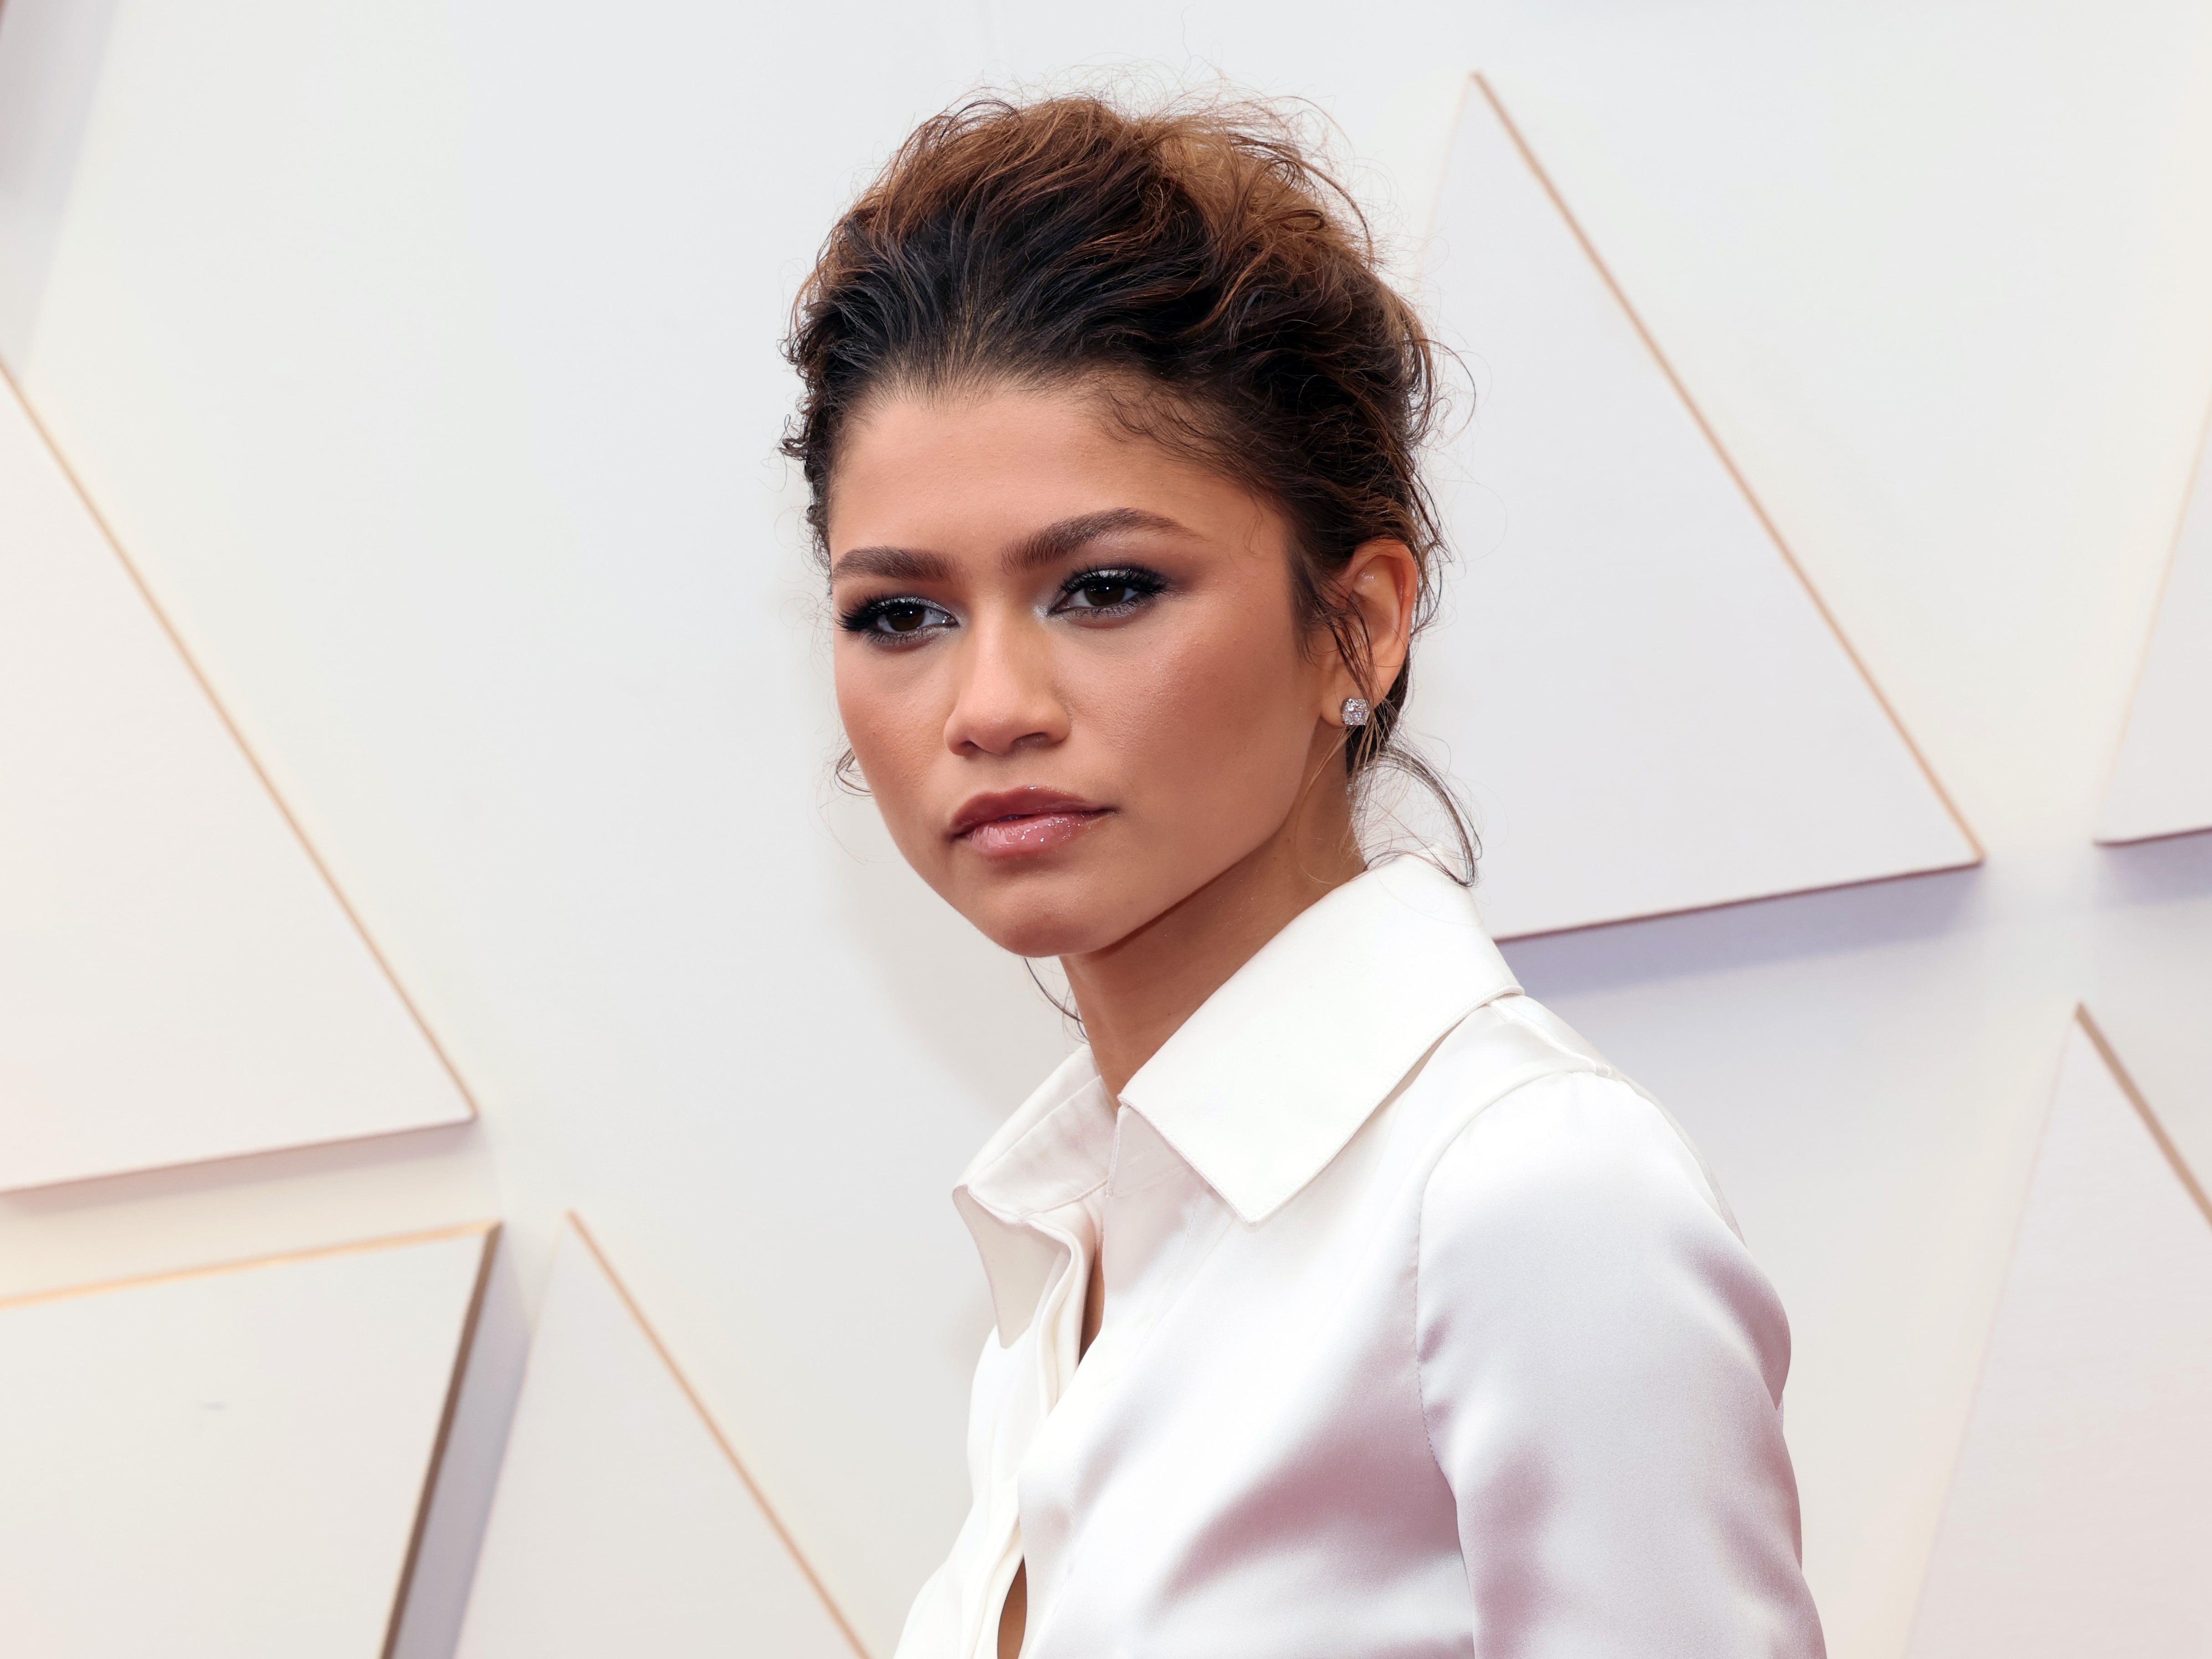 Zendaya did her own makeup for the Oscars red carpet | The Independent